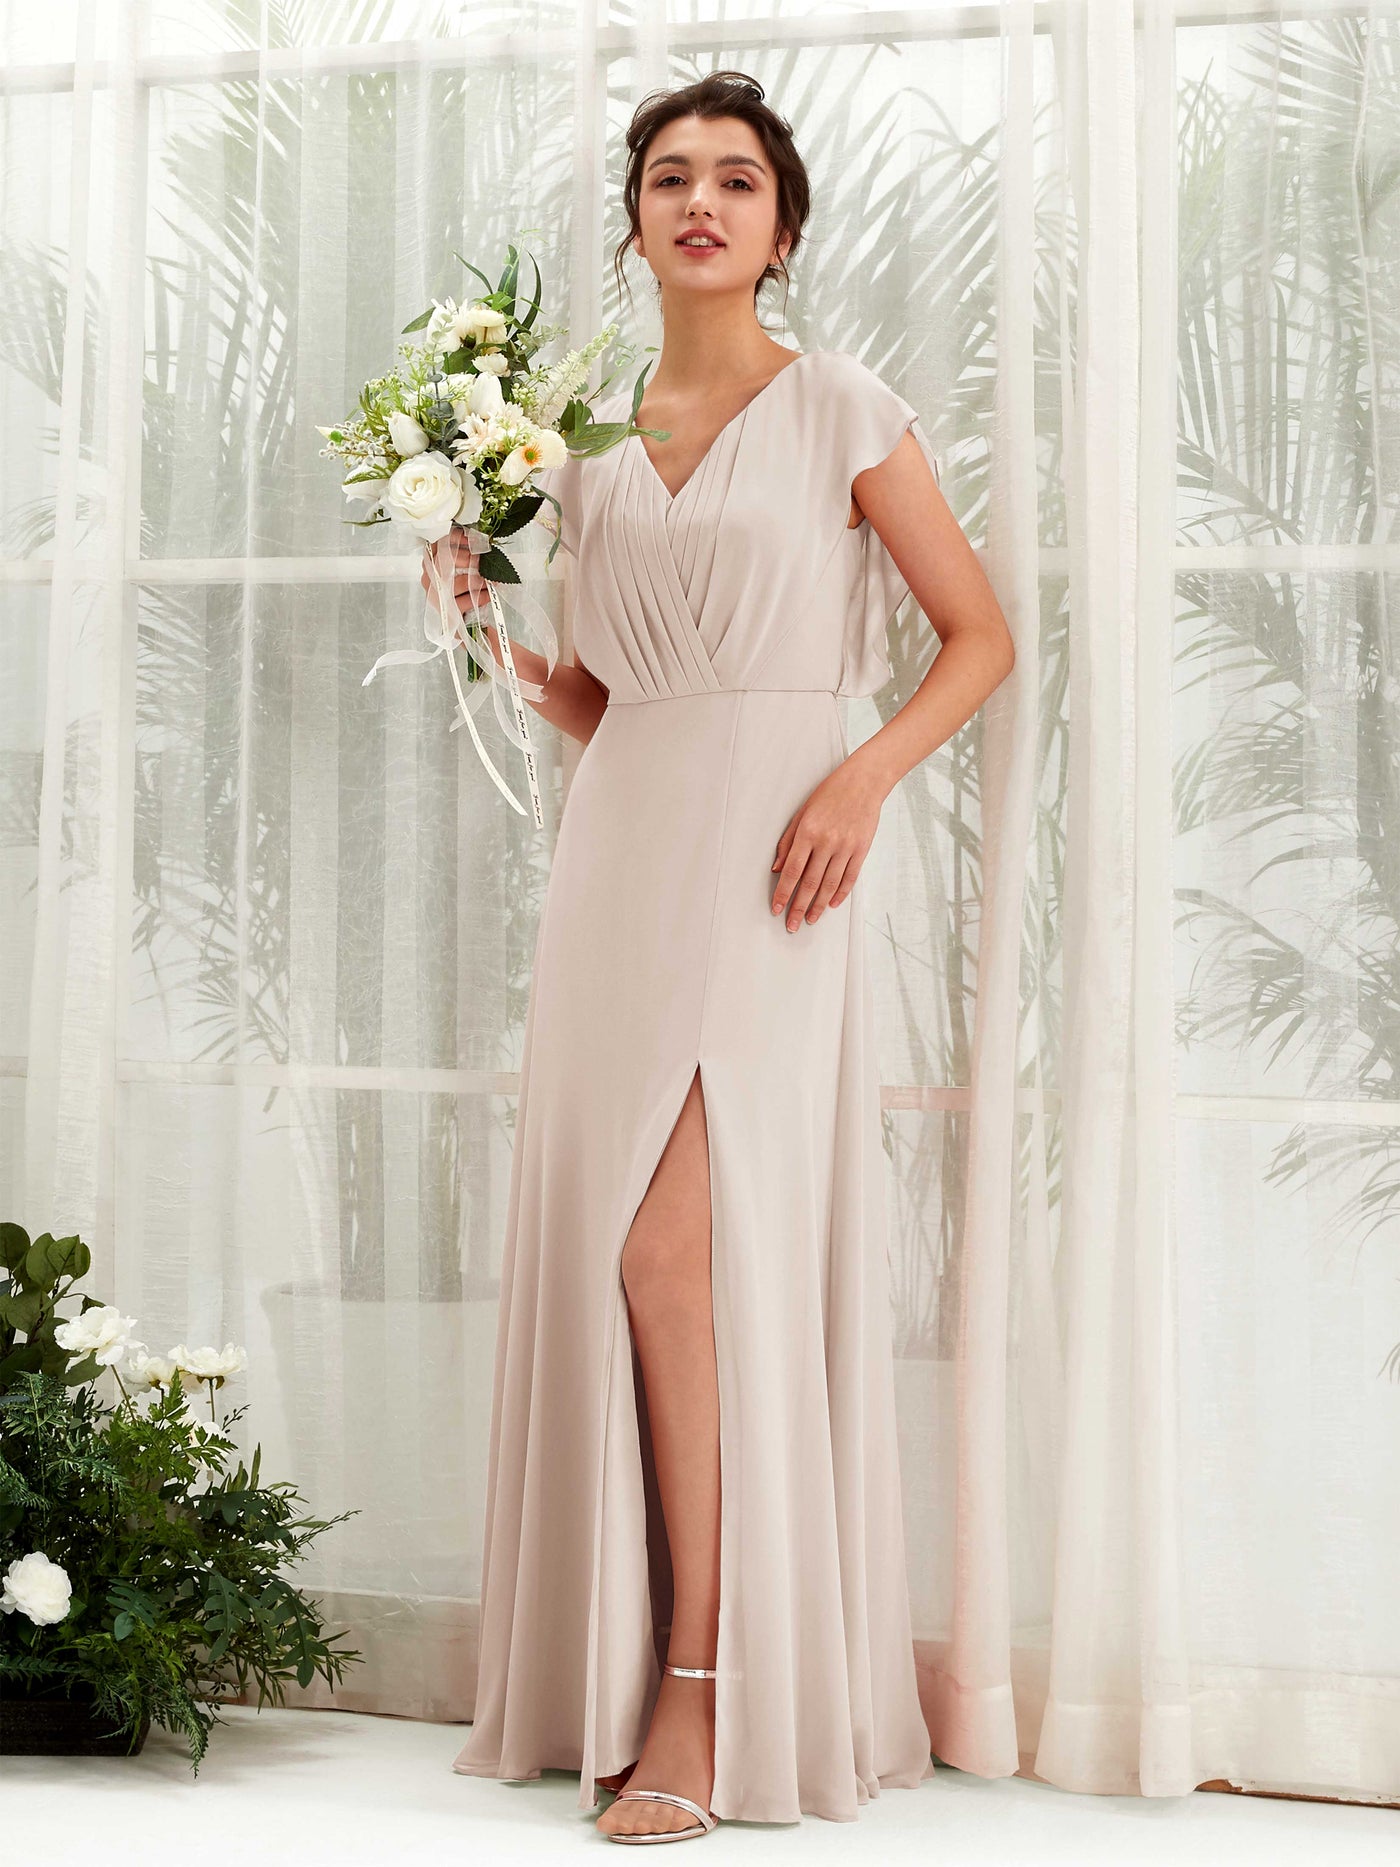 Champagne Bridesmaid Dresses Bridesmaid Dress A-line Chiffon V-neck Full Length Short Sleeves Wedding Party Dress (81225616)#color_champagne